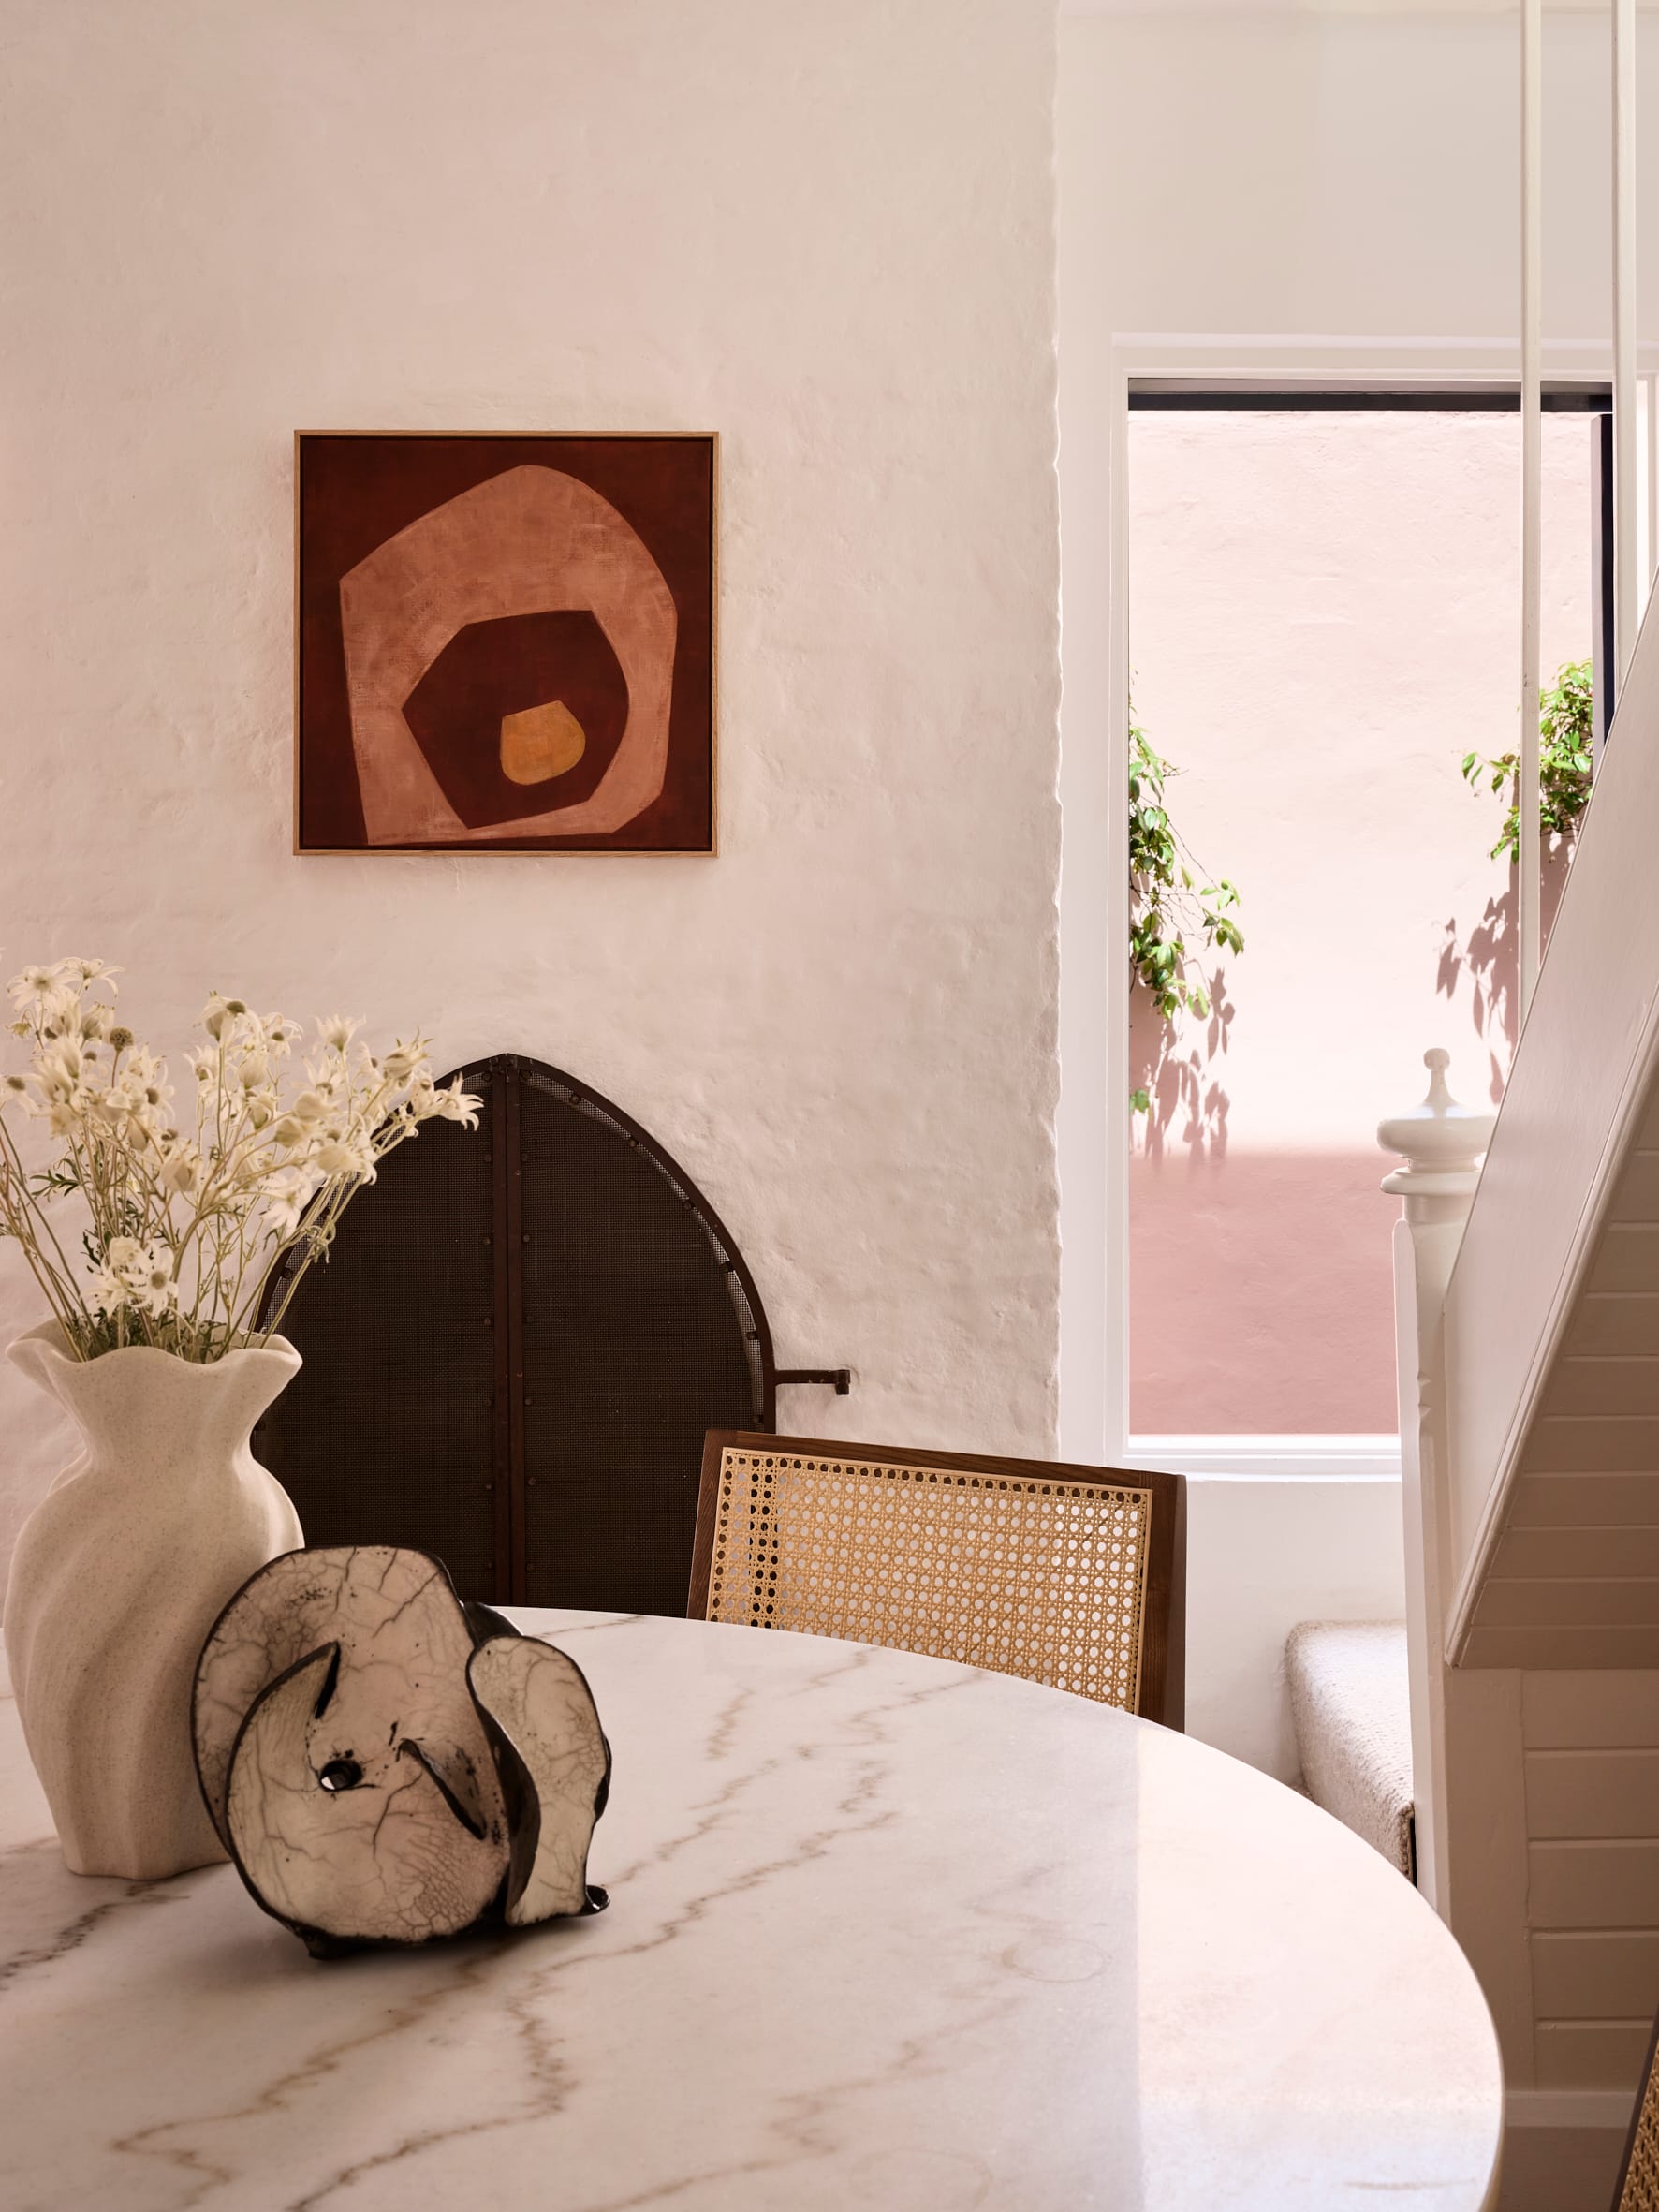 Chapel House by FURNISHD. Photography by Alicia Taylor. Round marble table with rattan chair. White brick wall in background with window looking onto pink outside wall.